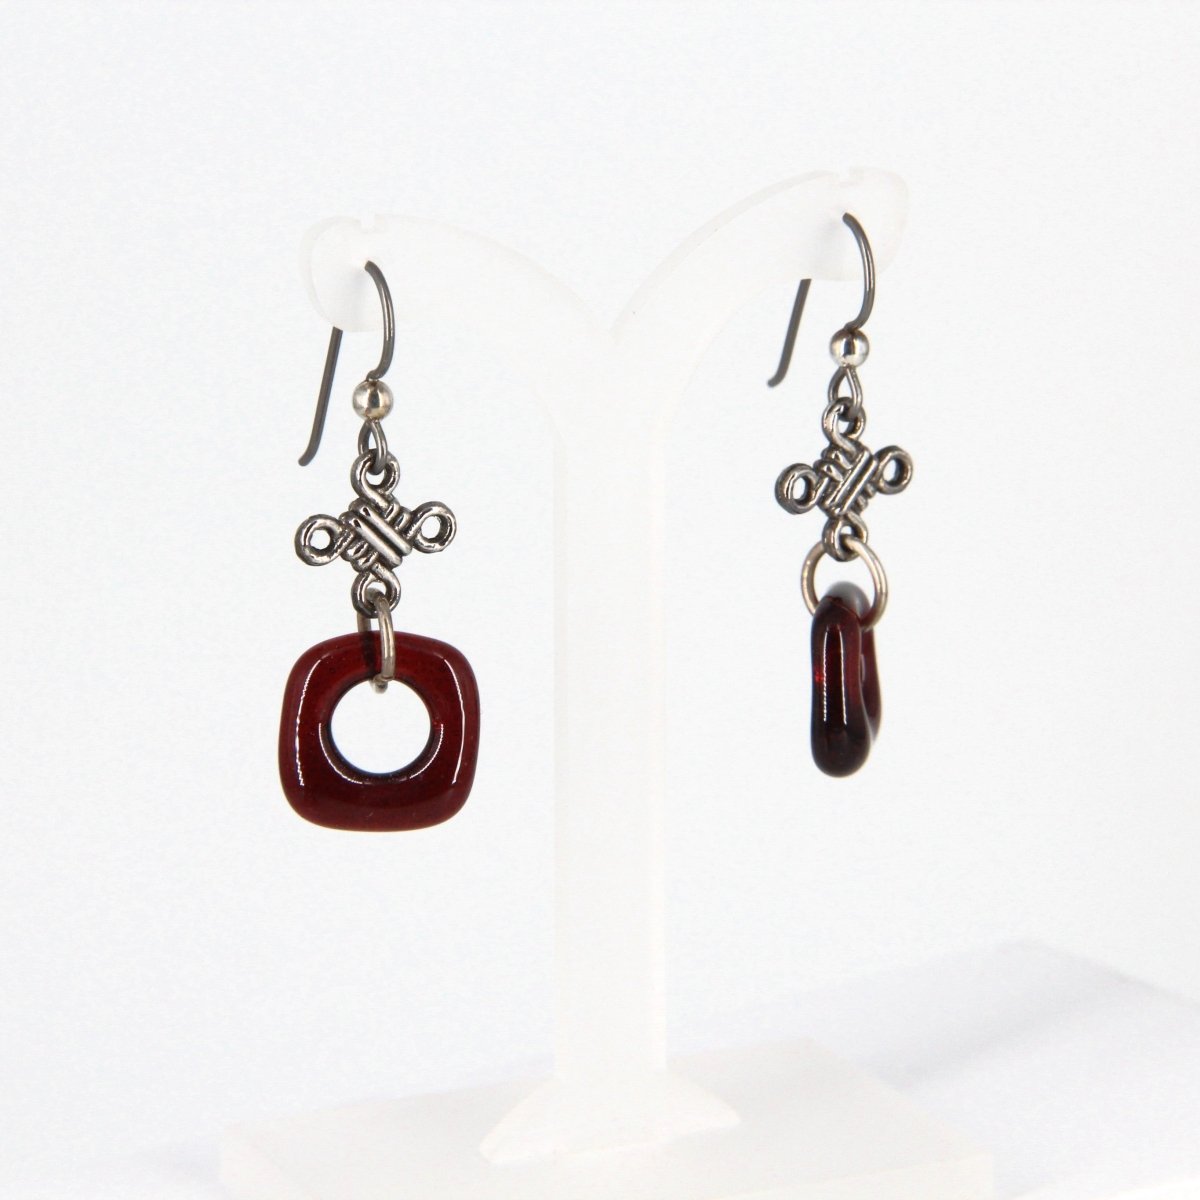 Dark Red Glass Dangle Earrings with Silver Knot Charm